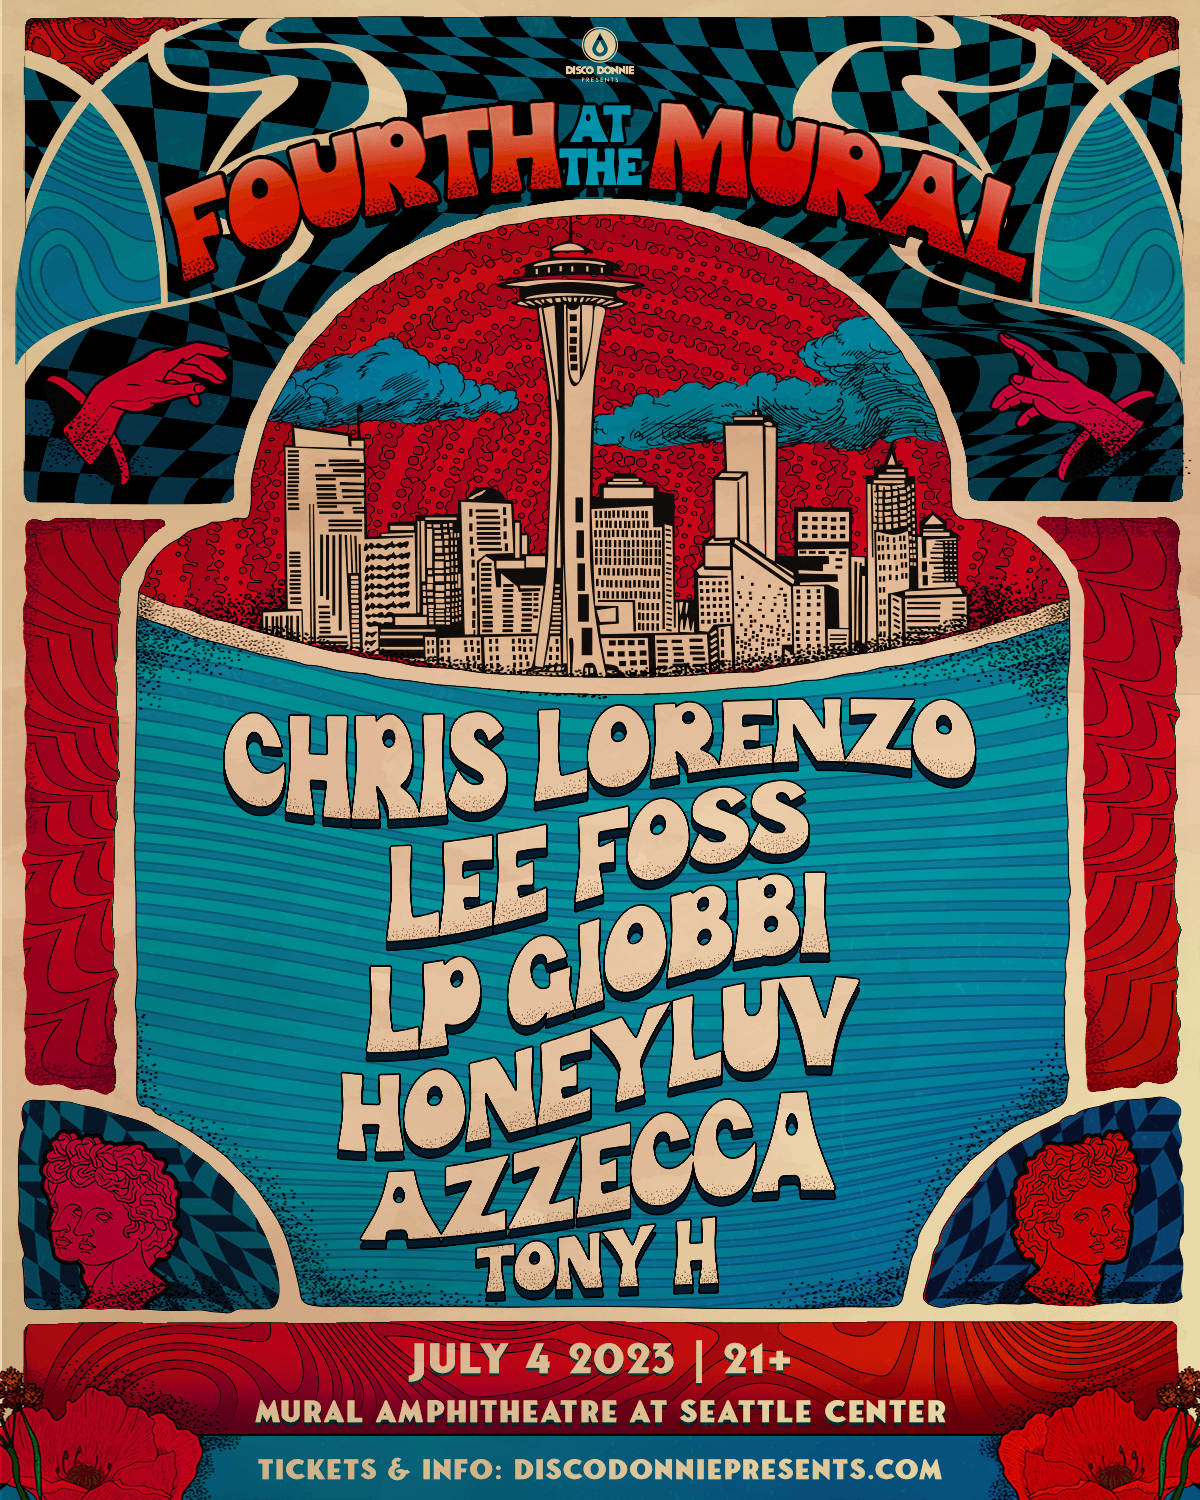 Lineup for "Fourth at the Mural"